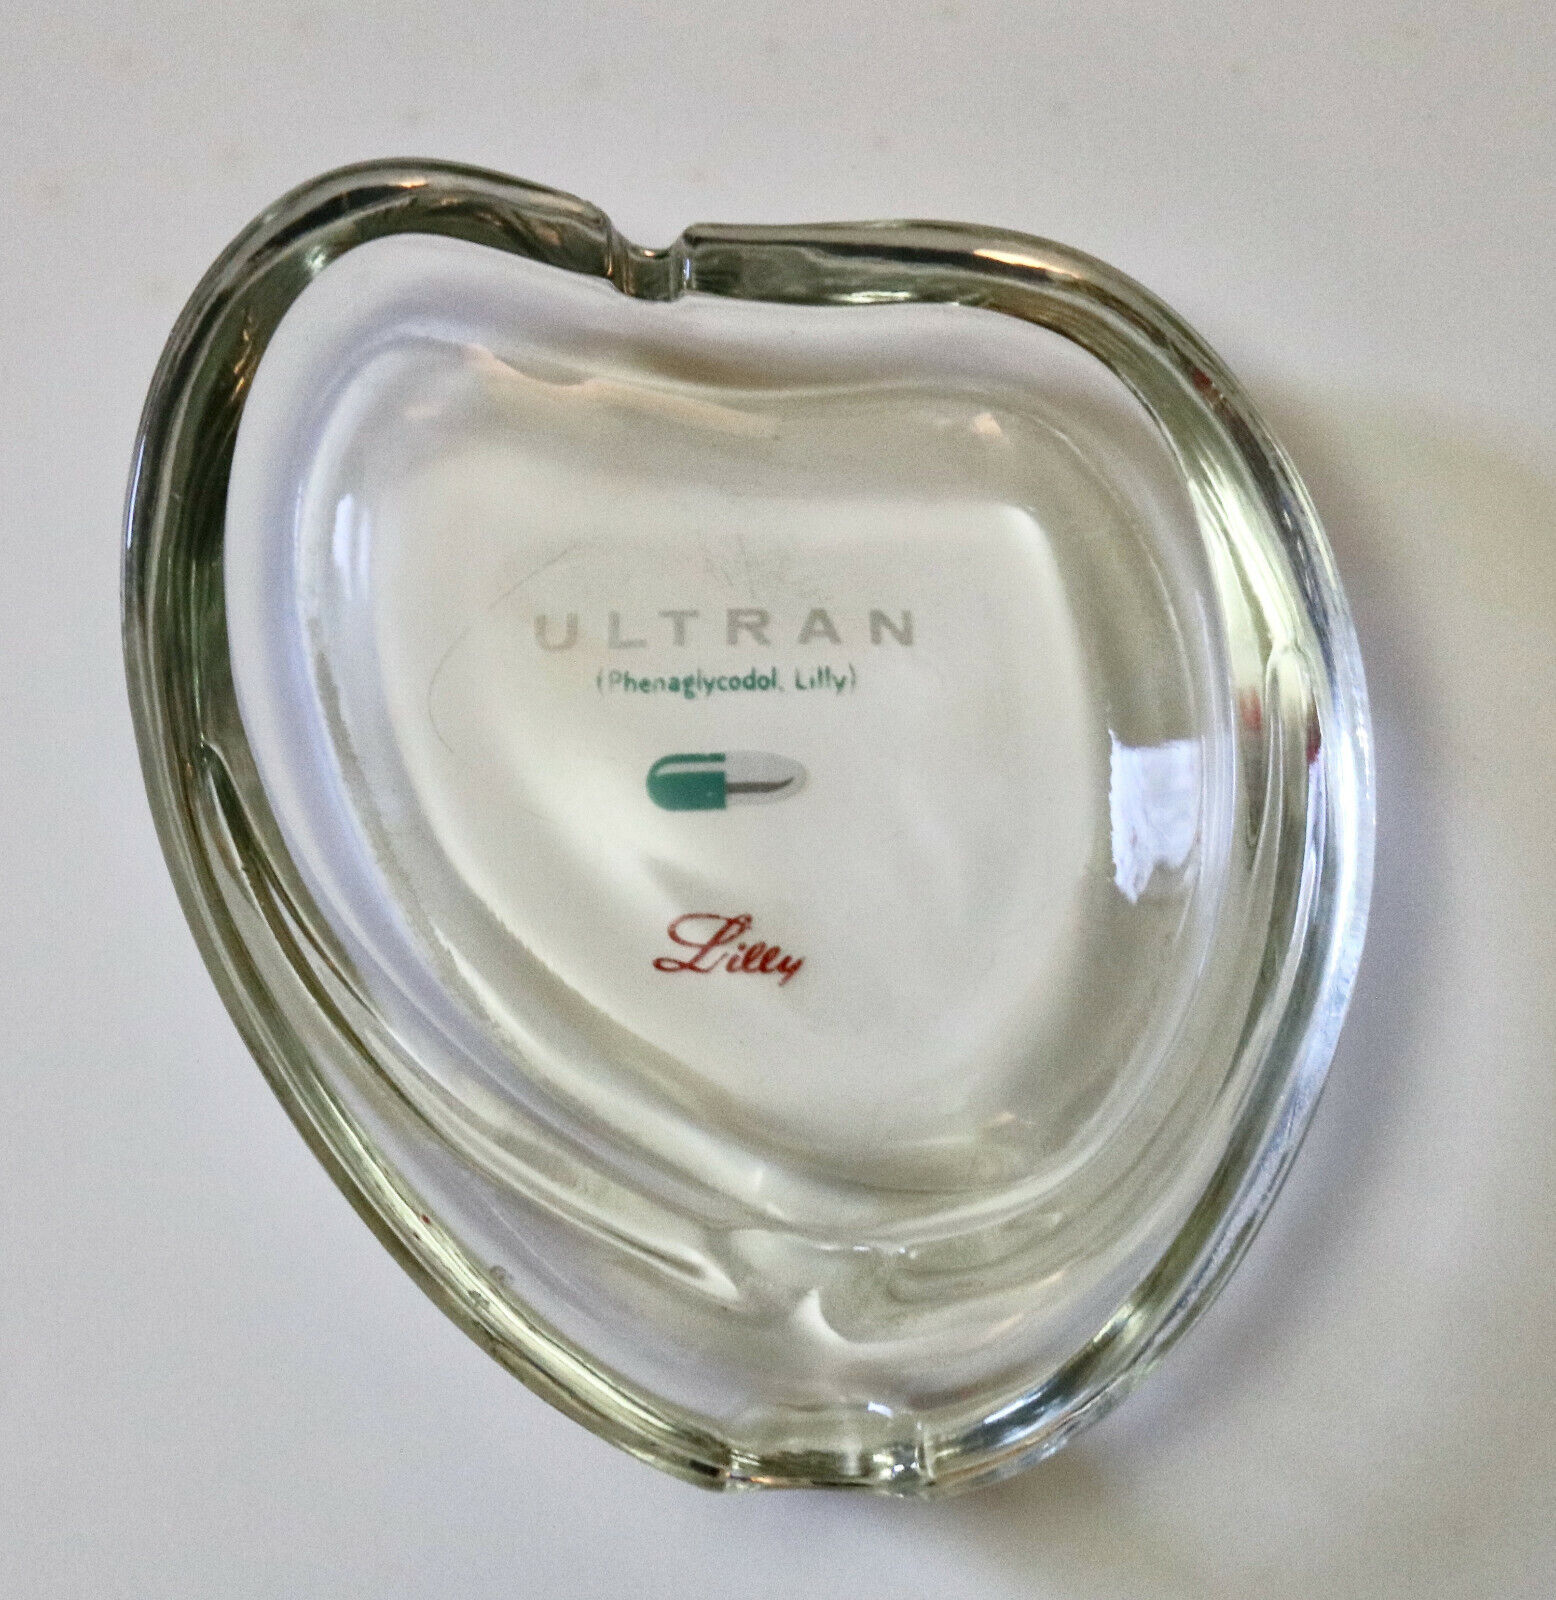 Lilly ULTRAN vintage pharmaceutical advertising paper weight kidney shape glass